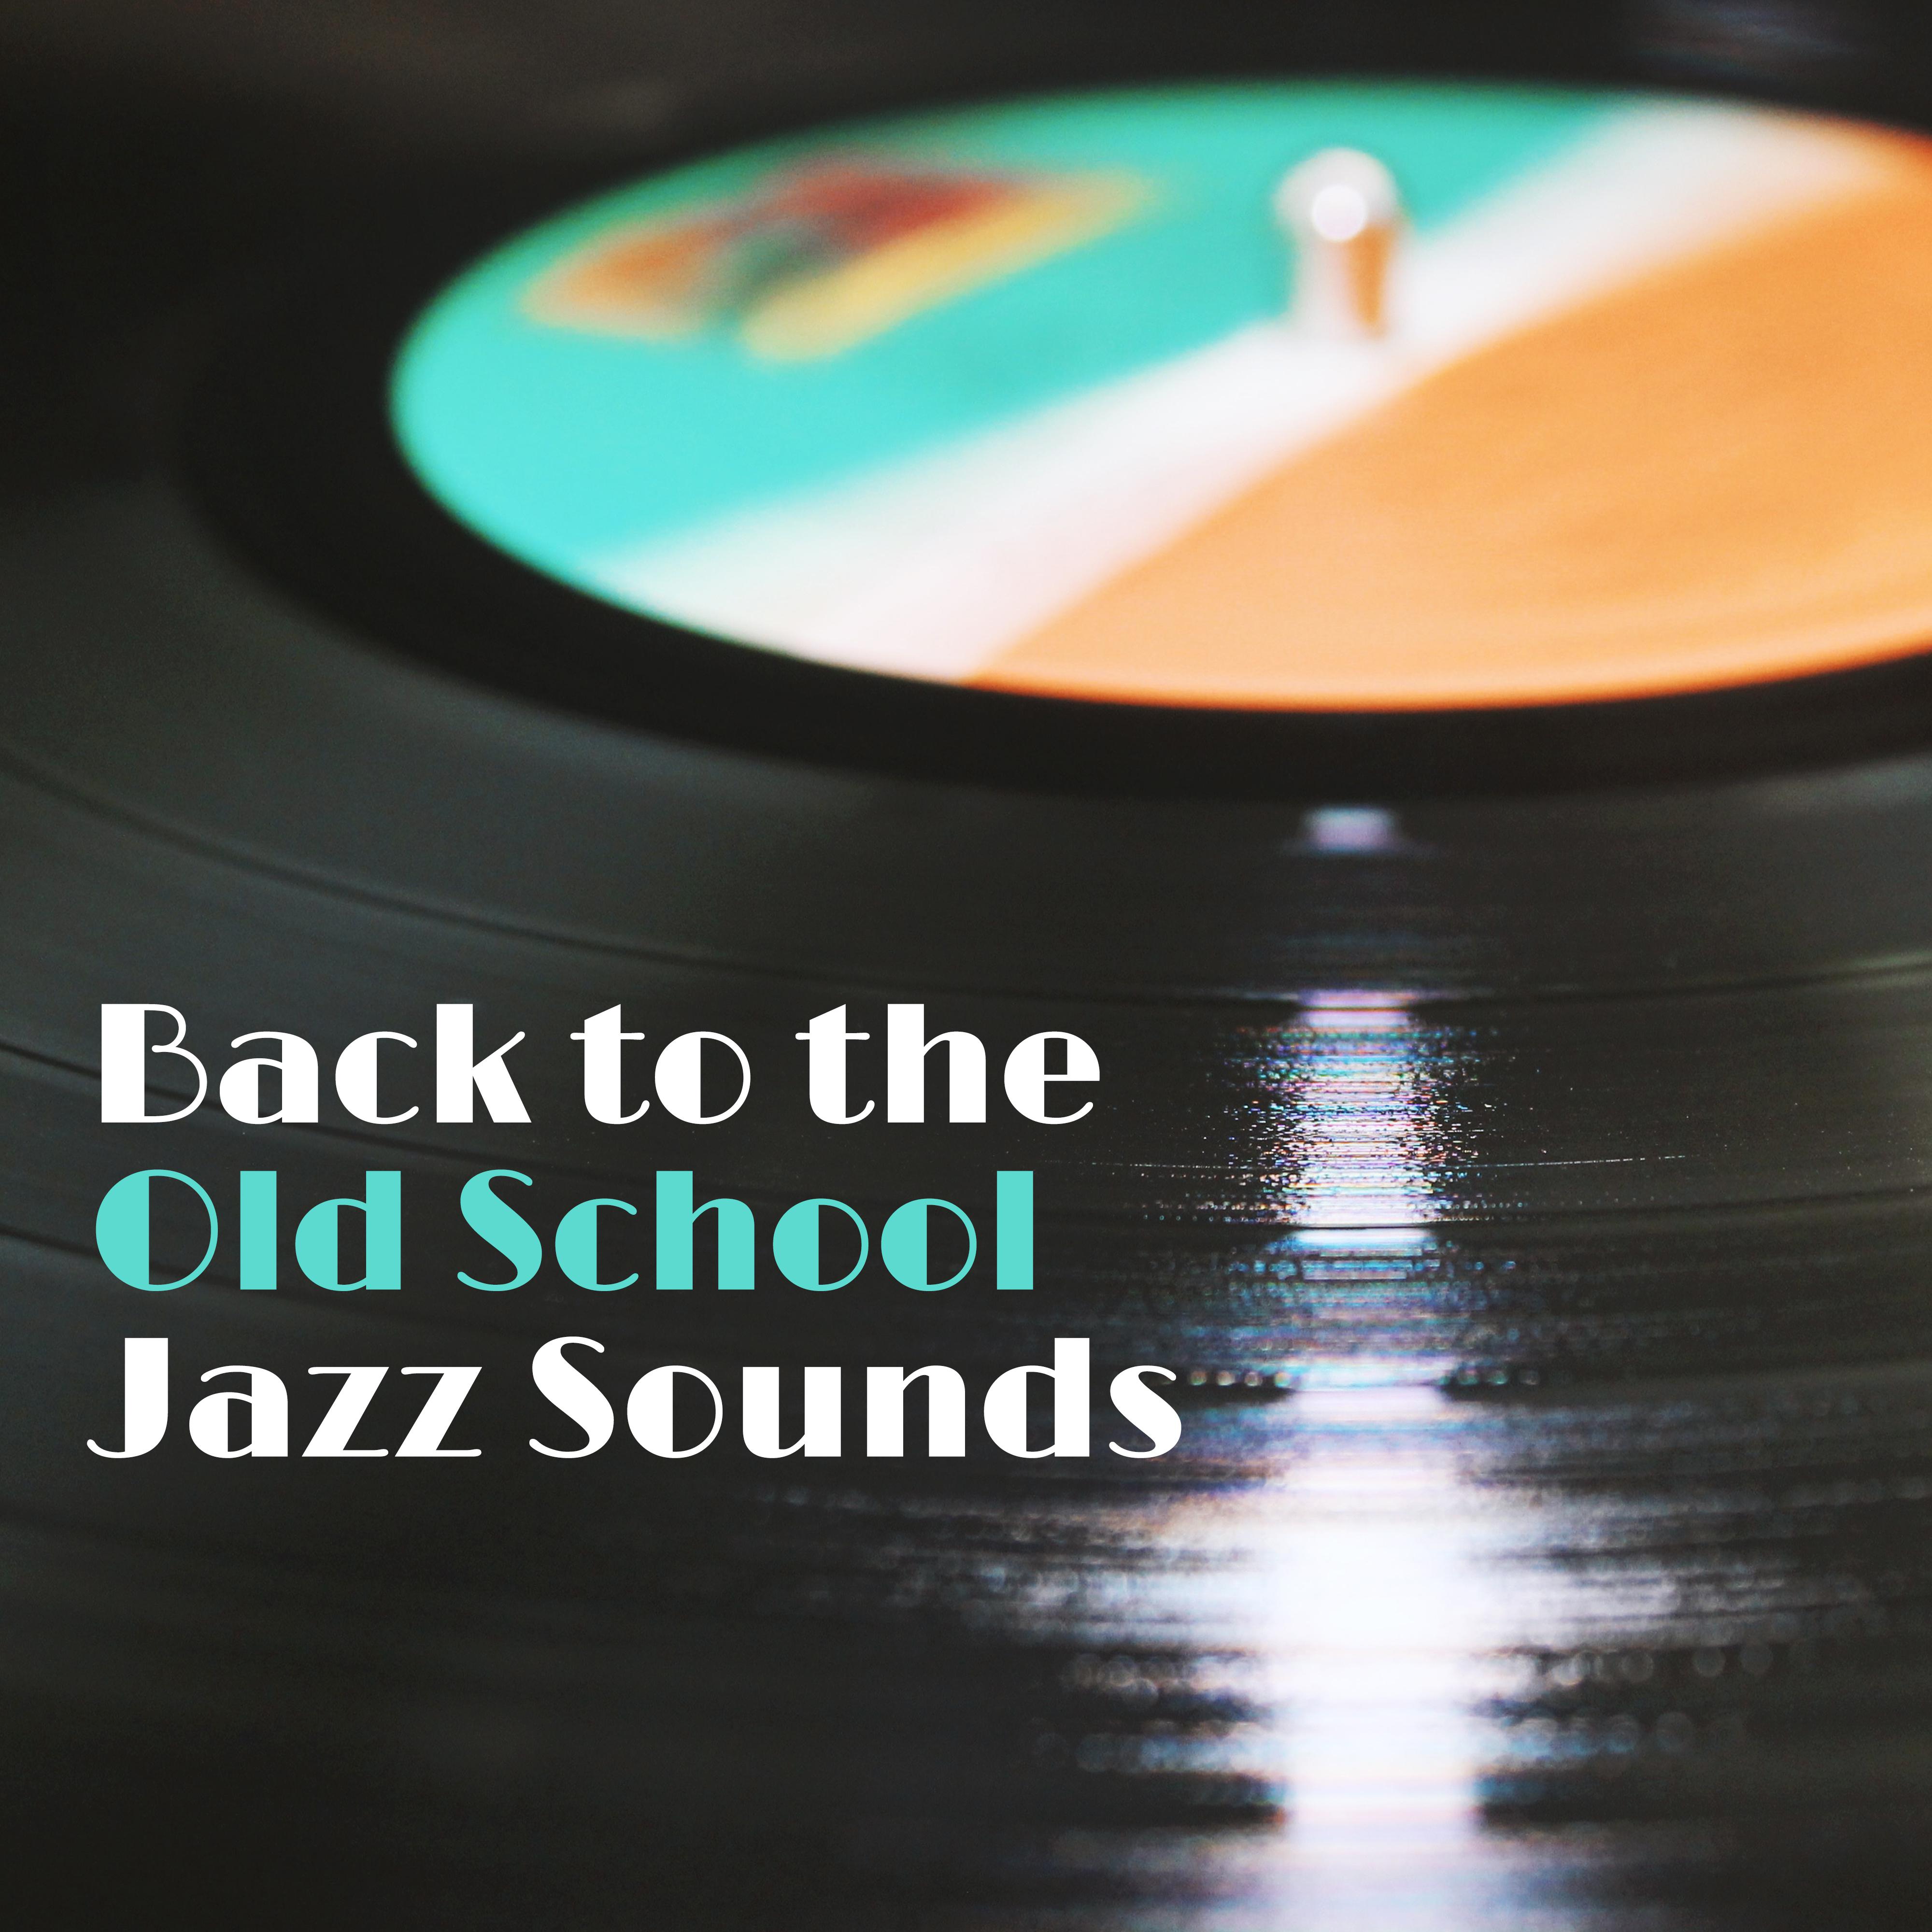 Back to the Old School Jazz Sounds: 2019 Instrumental Smooth Jazz Compilation with Vintage Melodies and Sounds of Piano, Sax & Many More